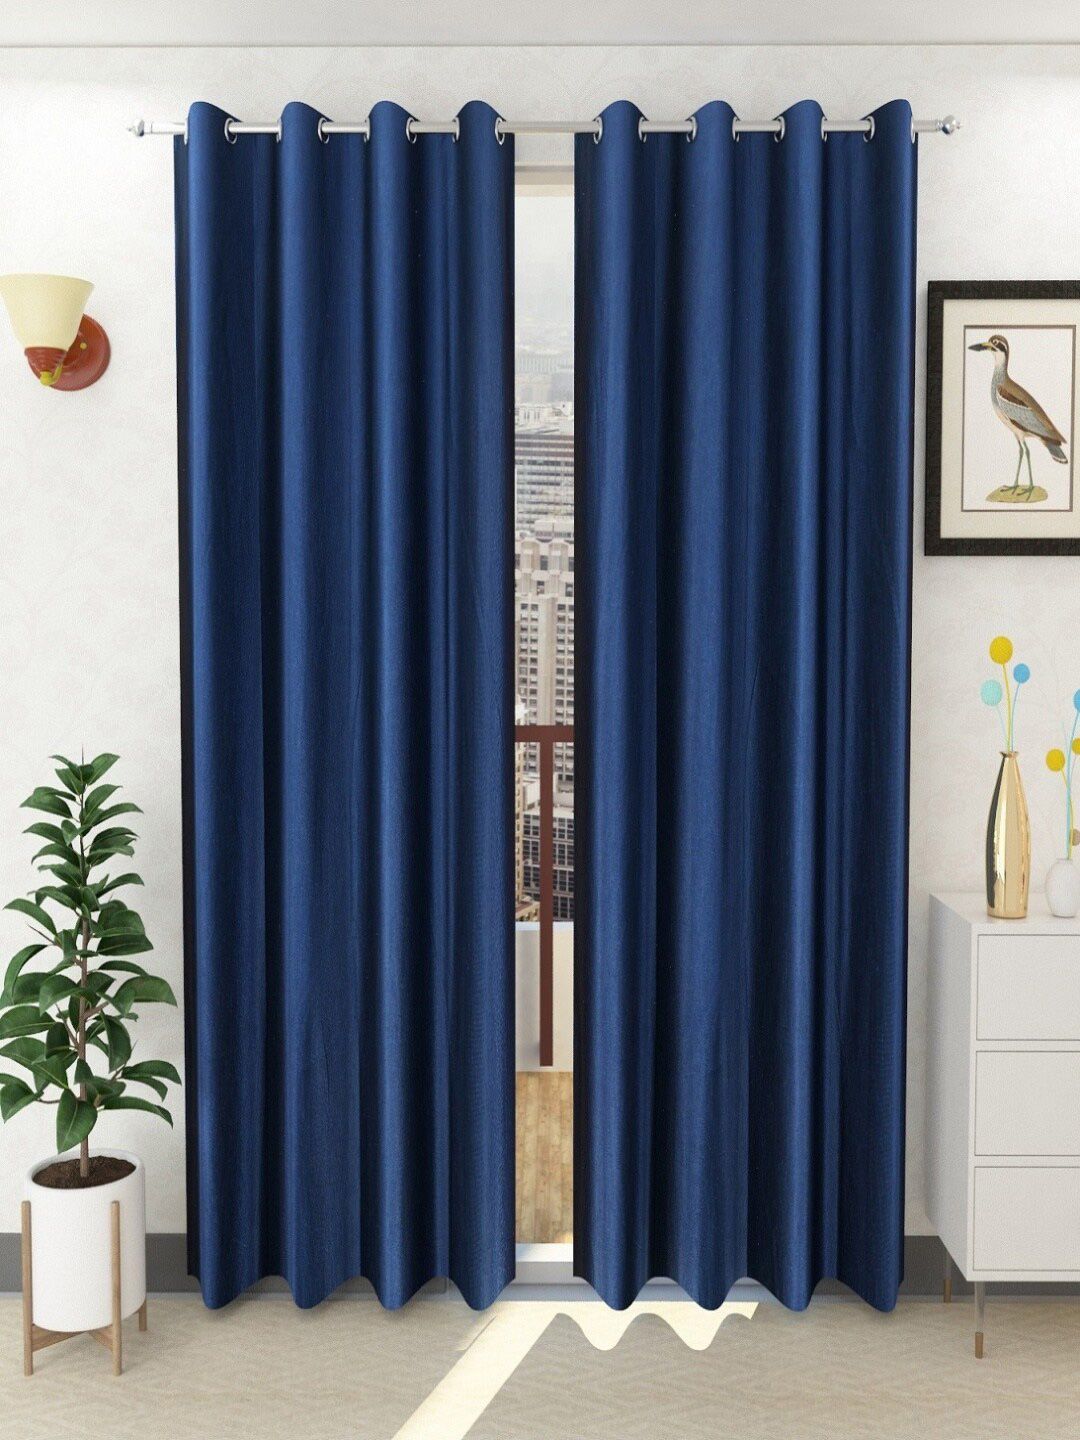 Homefab India Set of 2 Long Door Curtains Price in India